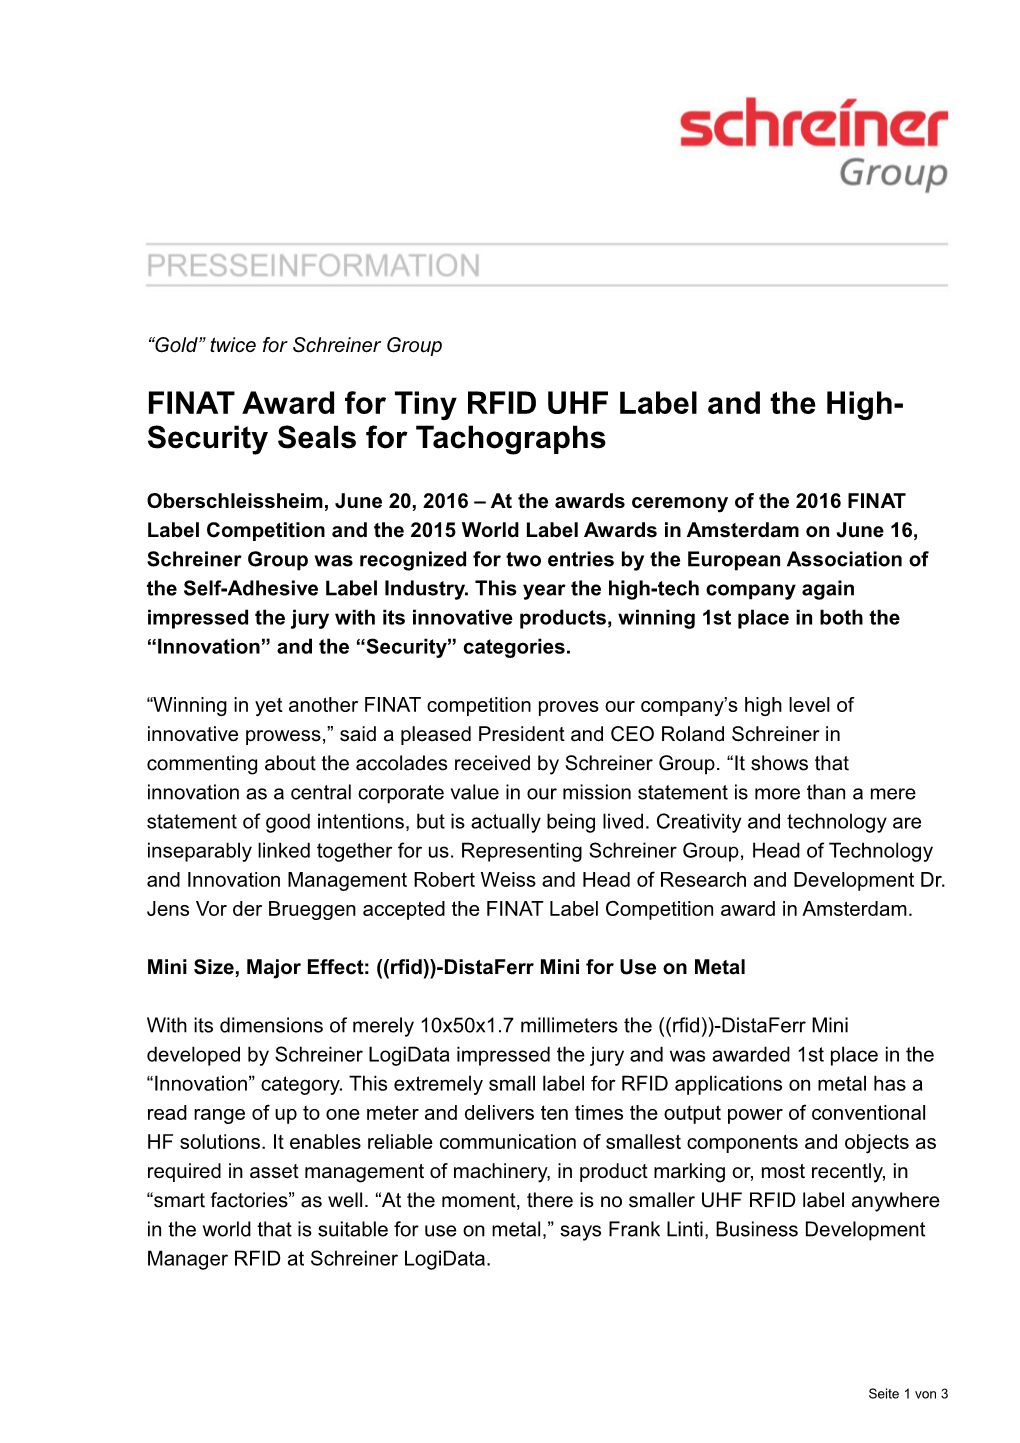 Finataward for Tiny Rfiduhflabel Andthe High-Security Seals for Tachographs